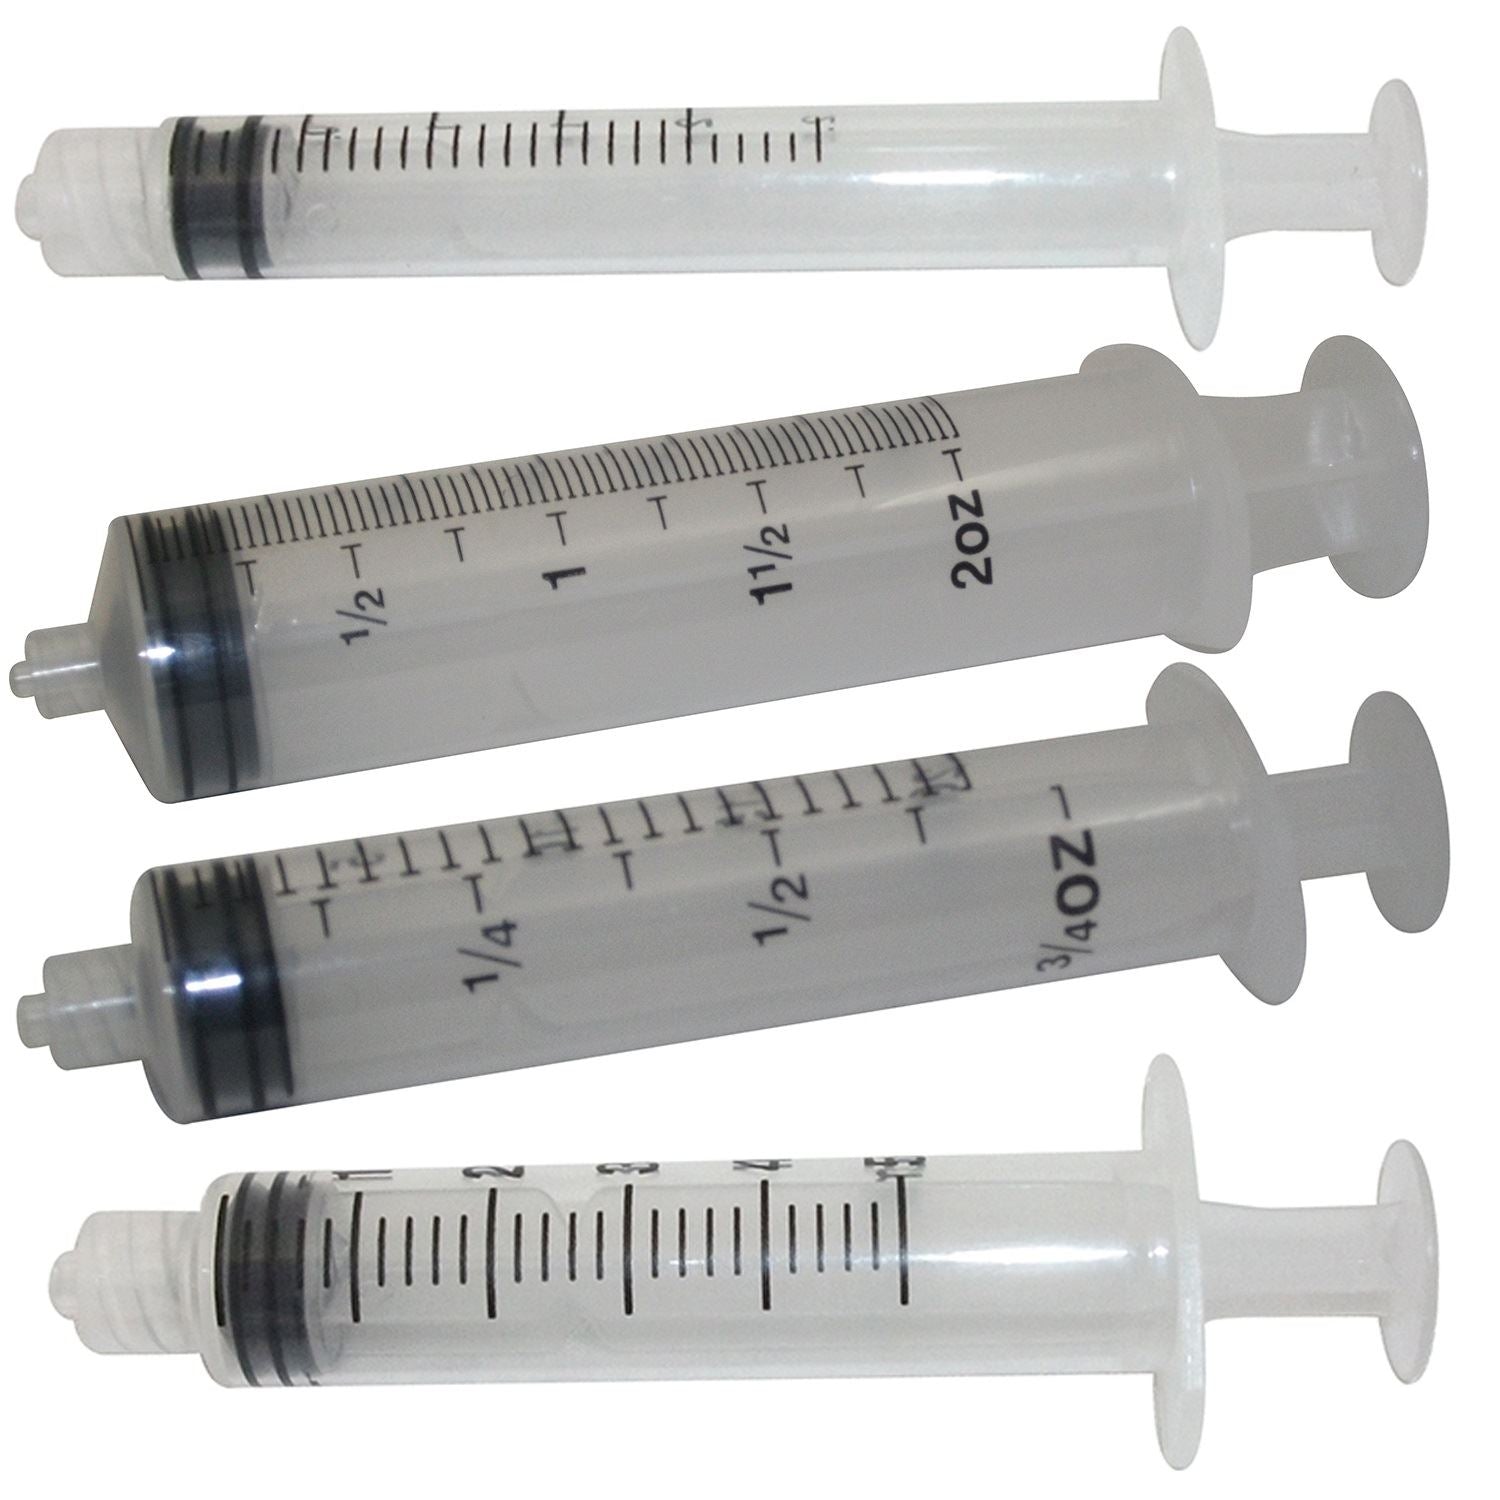 Fearing Syringe Disposable - Just Horse Riders